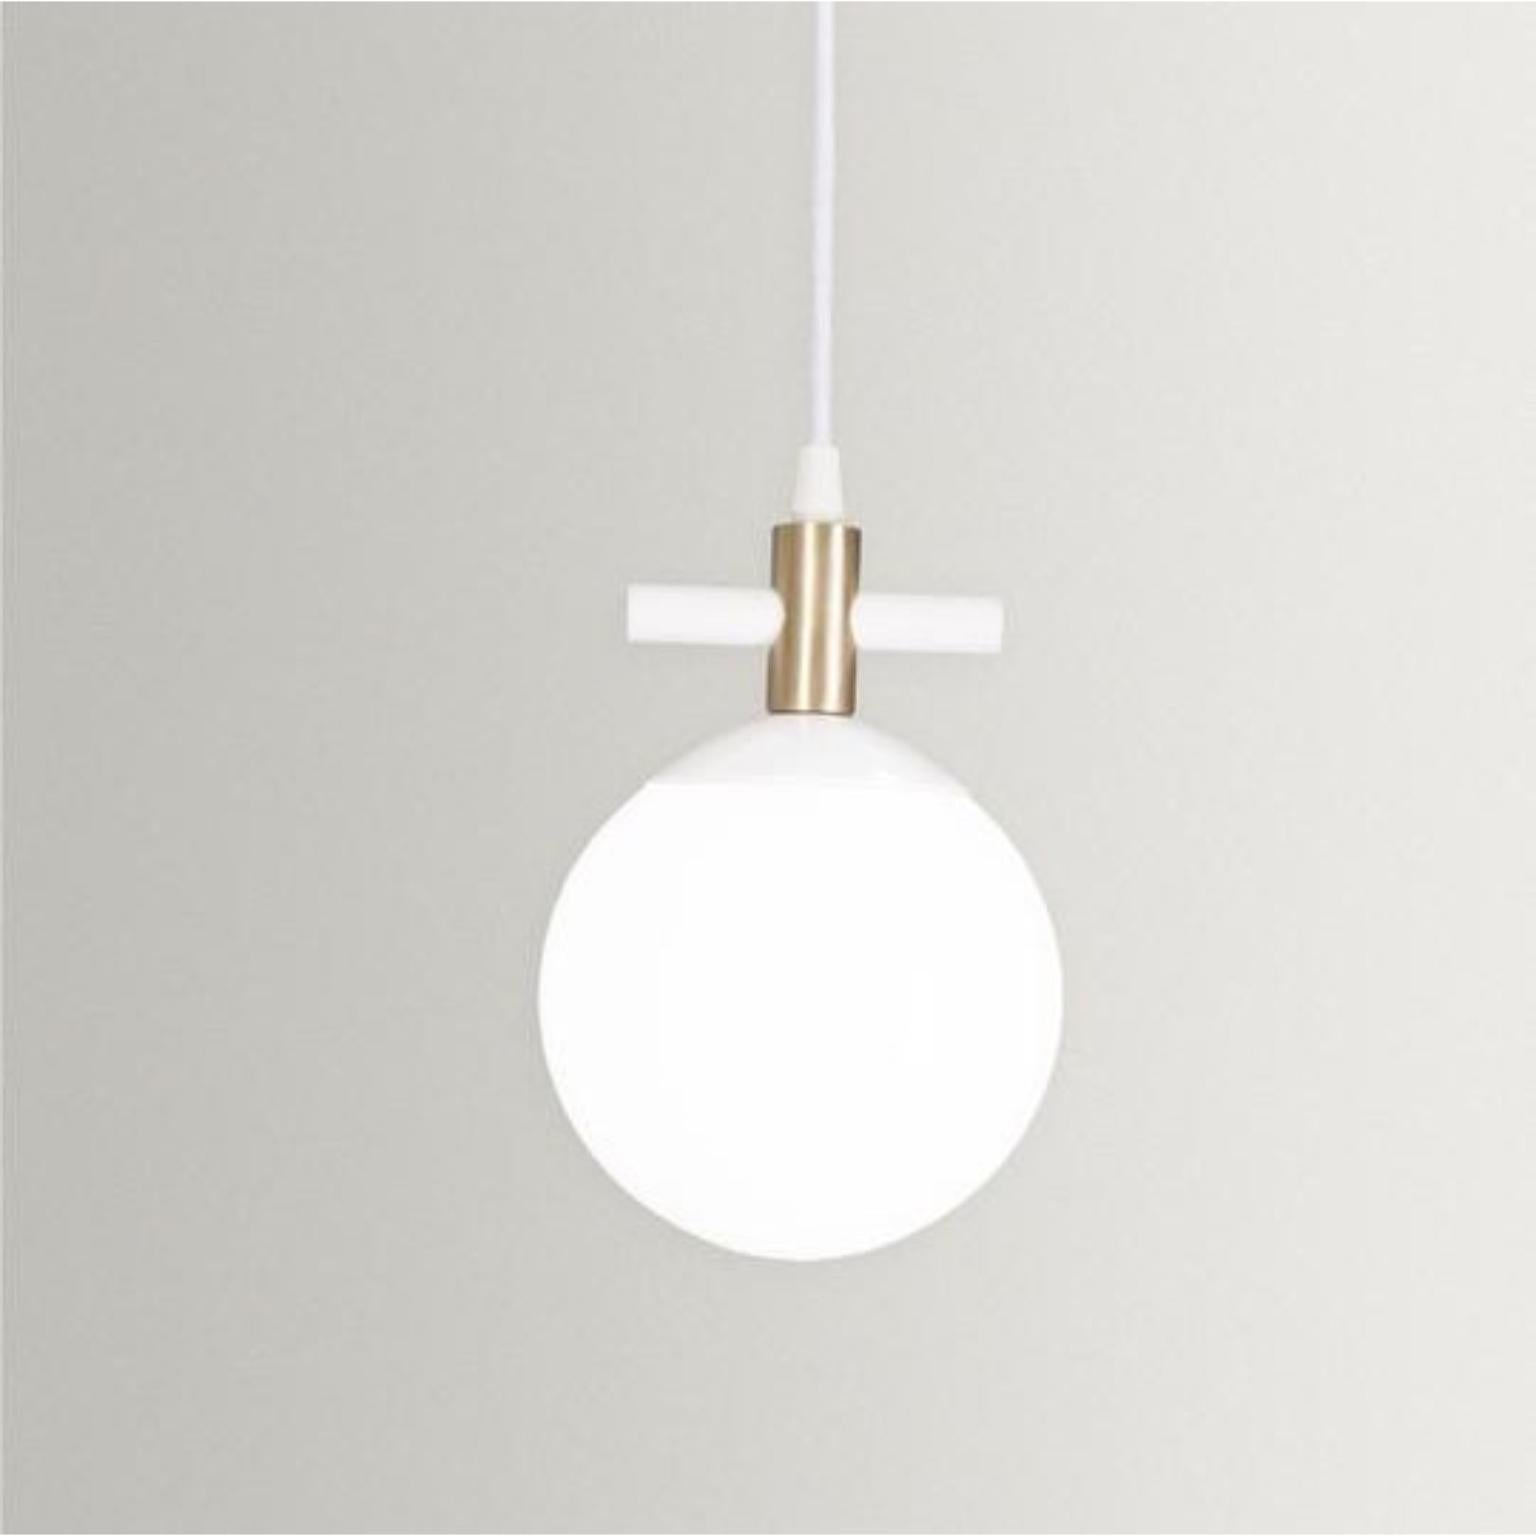 Unique esferra pendant by Hatsu
Dimensions: W 14 x H 19 cm 
Materials: Opal glass with powder coated aluminium

Hatsu is a design studio based in Mumbai that creates modern lighting that are unique and immediately recognisable. We started with